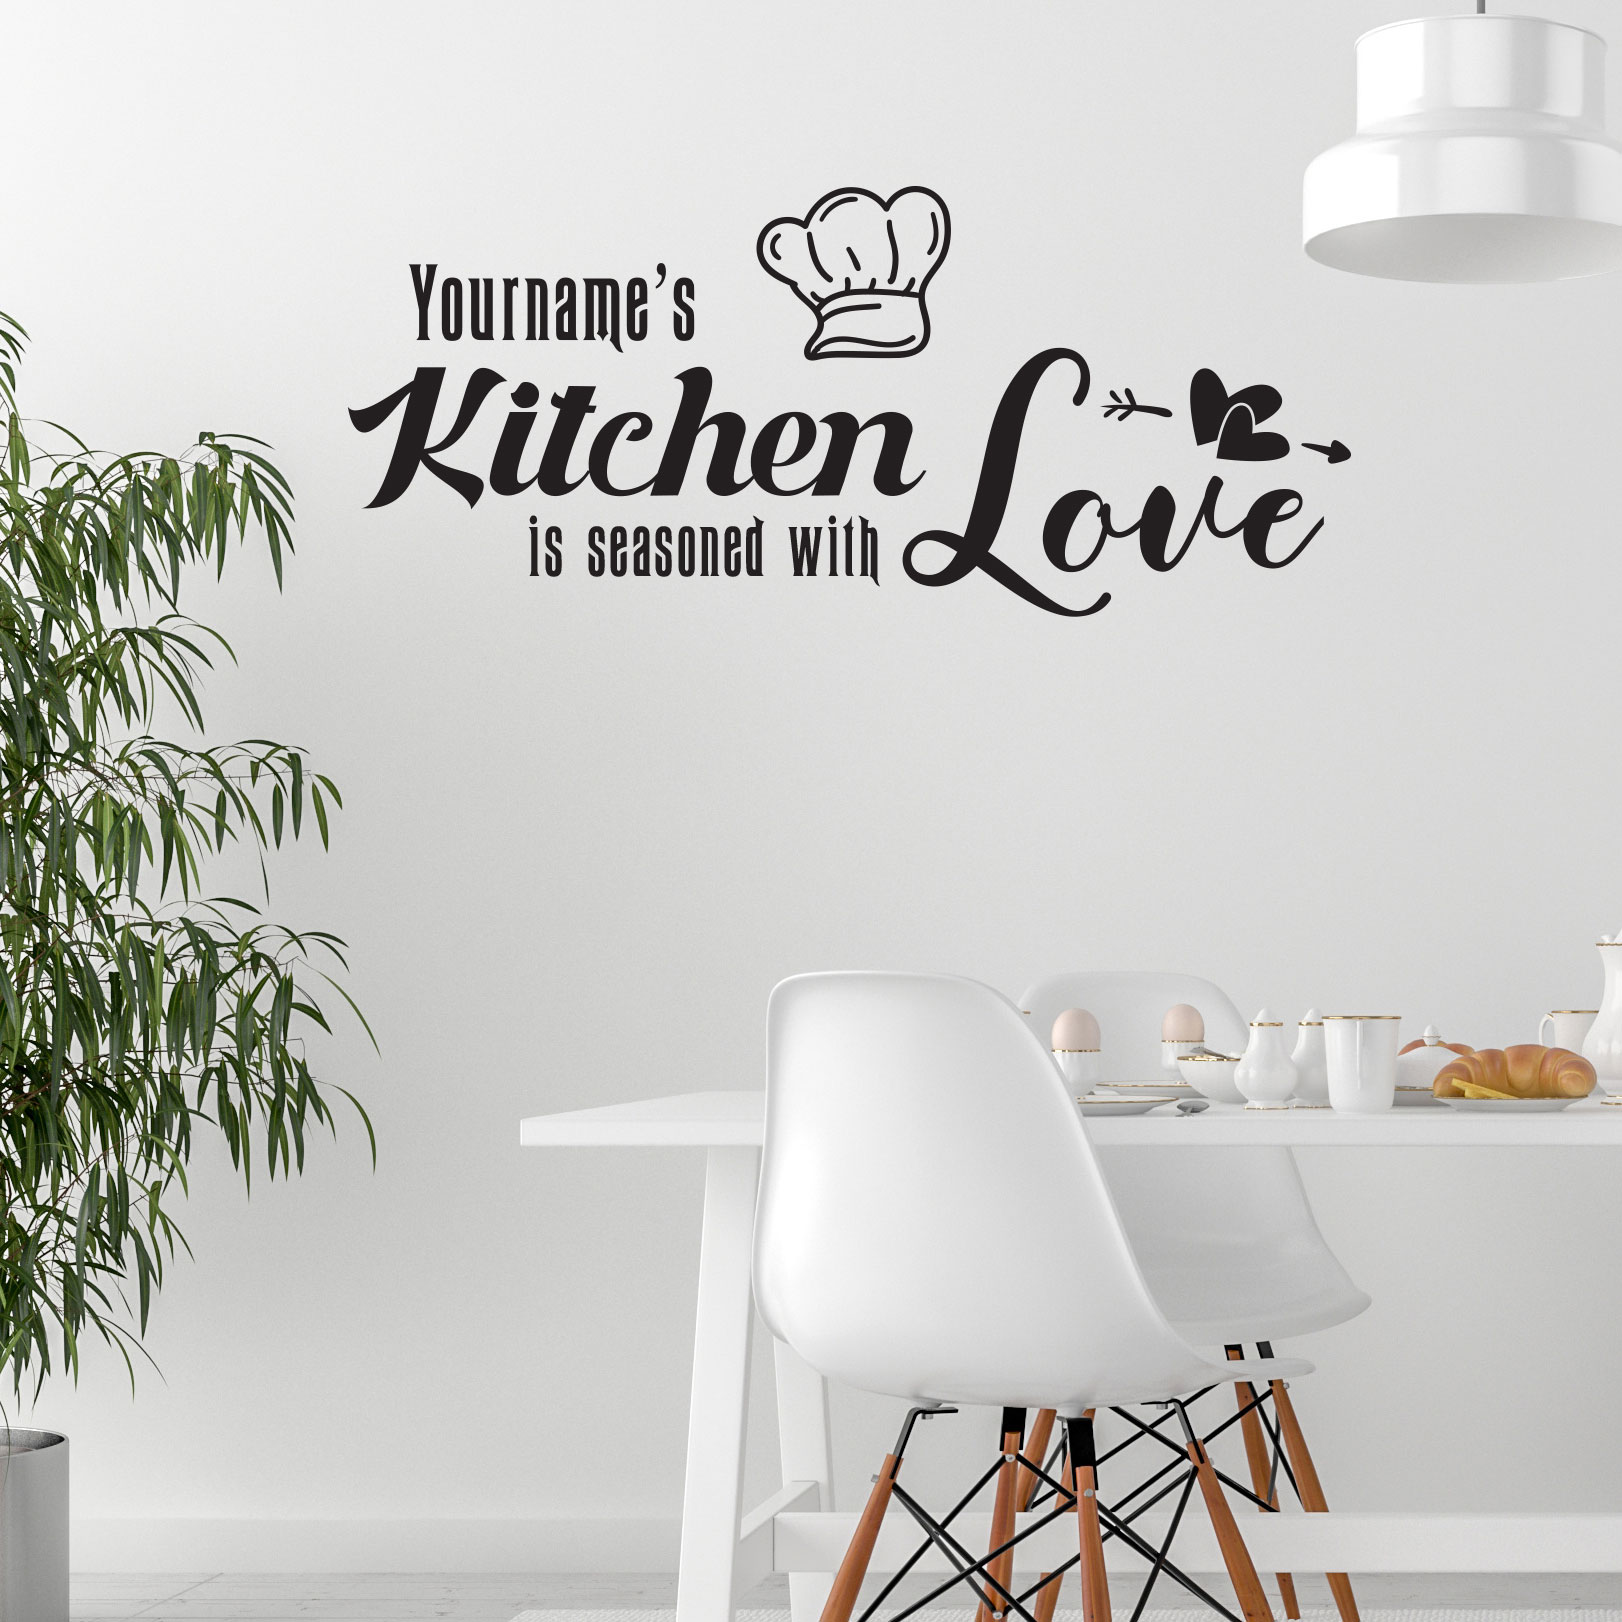 Will Putting Up Kitchen Quote Stickers Damage My Walls?